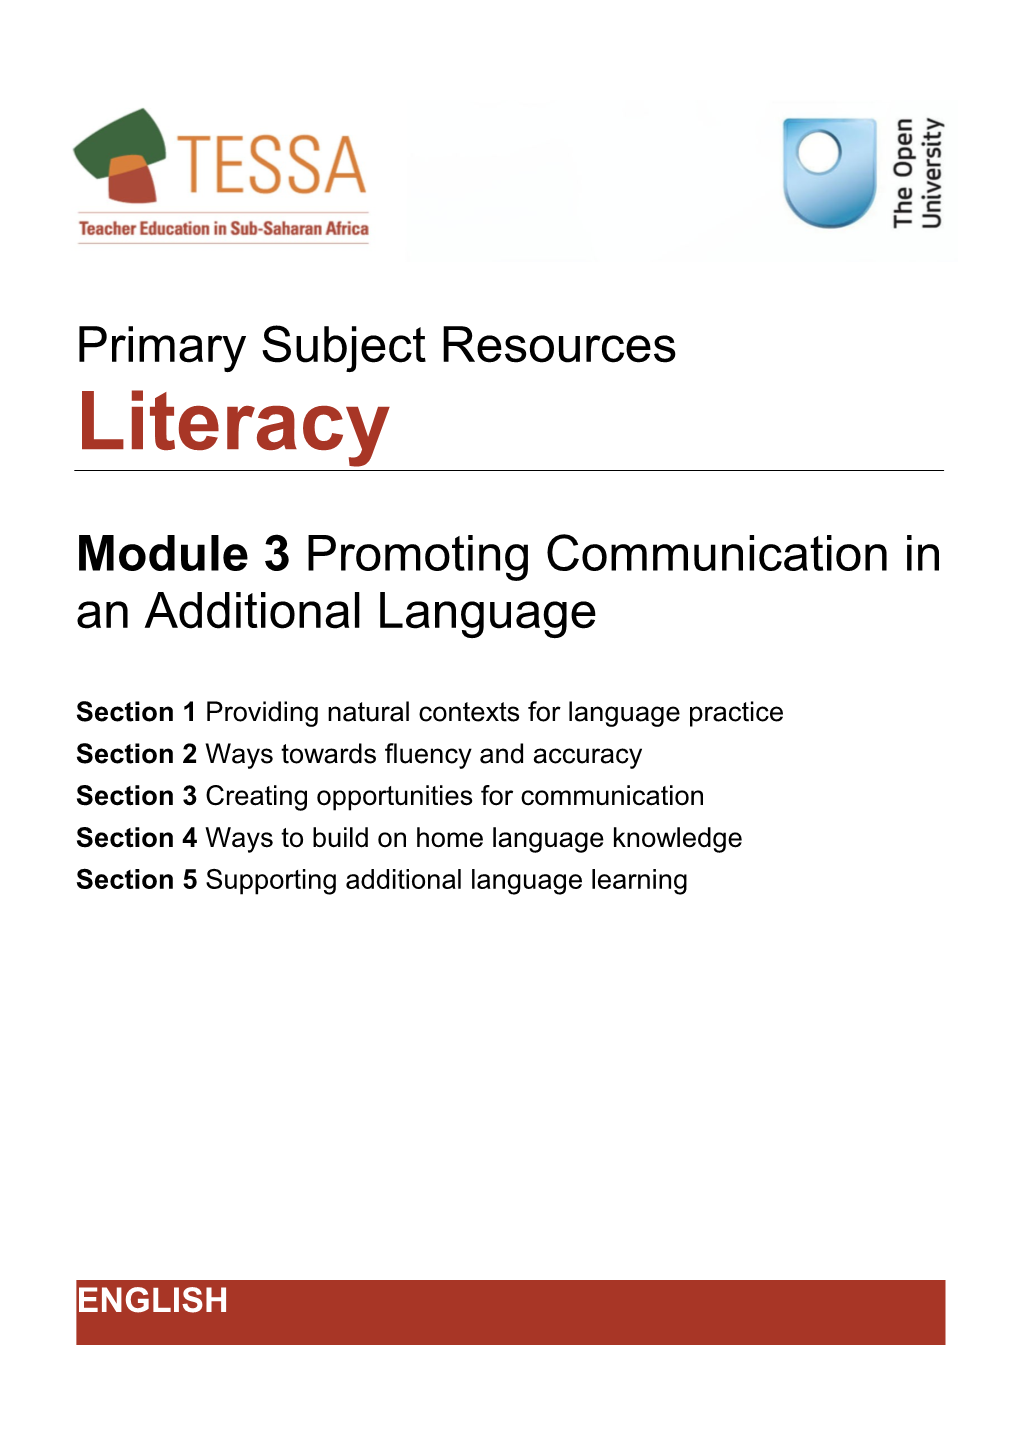 Module 3: Promoting Communication in an Additional Language